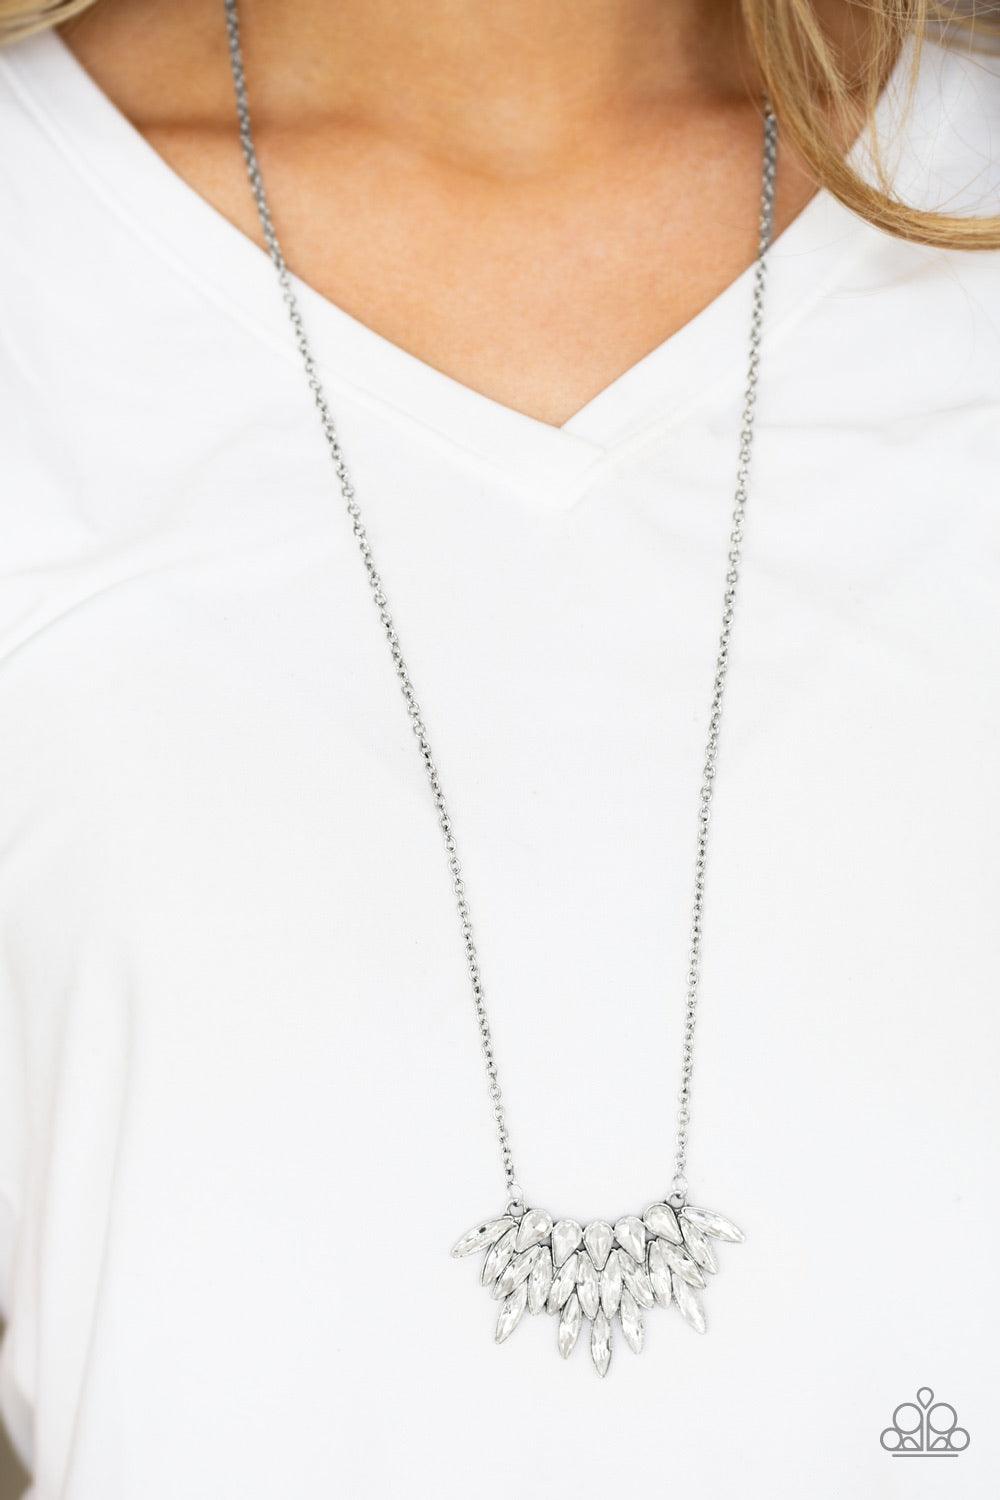 Paparazzi Accessories Crowning Moment - White Featuring regal teardrop and marquise style cuts, glittery white rhinestones fan from the bottom of a lengthened silver chain for a dramatic look. Features an adjustable clasp closure. Sold as one individual n